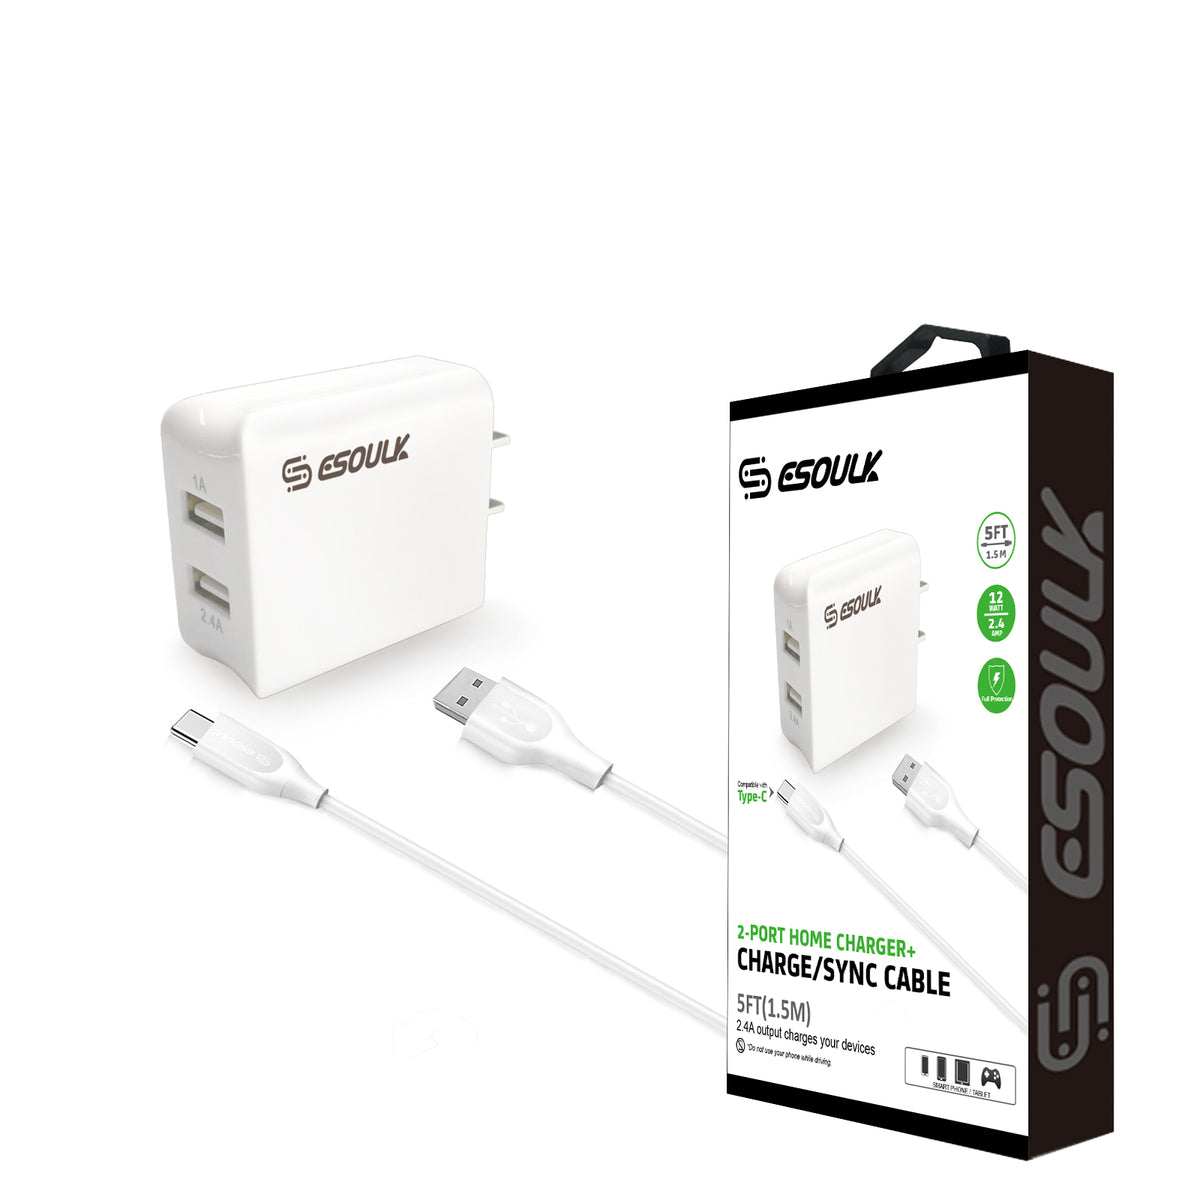 Esoulk Type-C 2-Port Home Charger with 5feet Cable - White